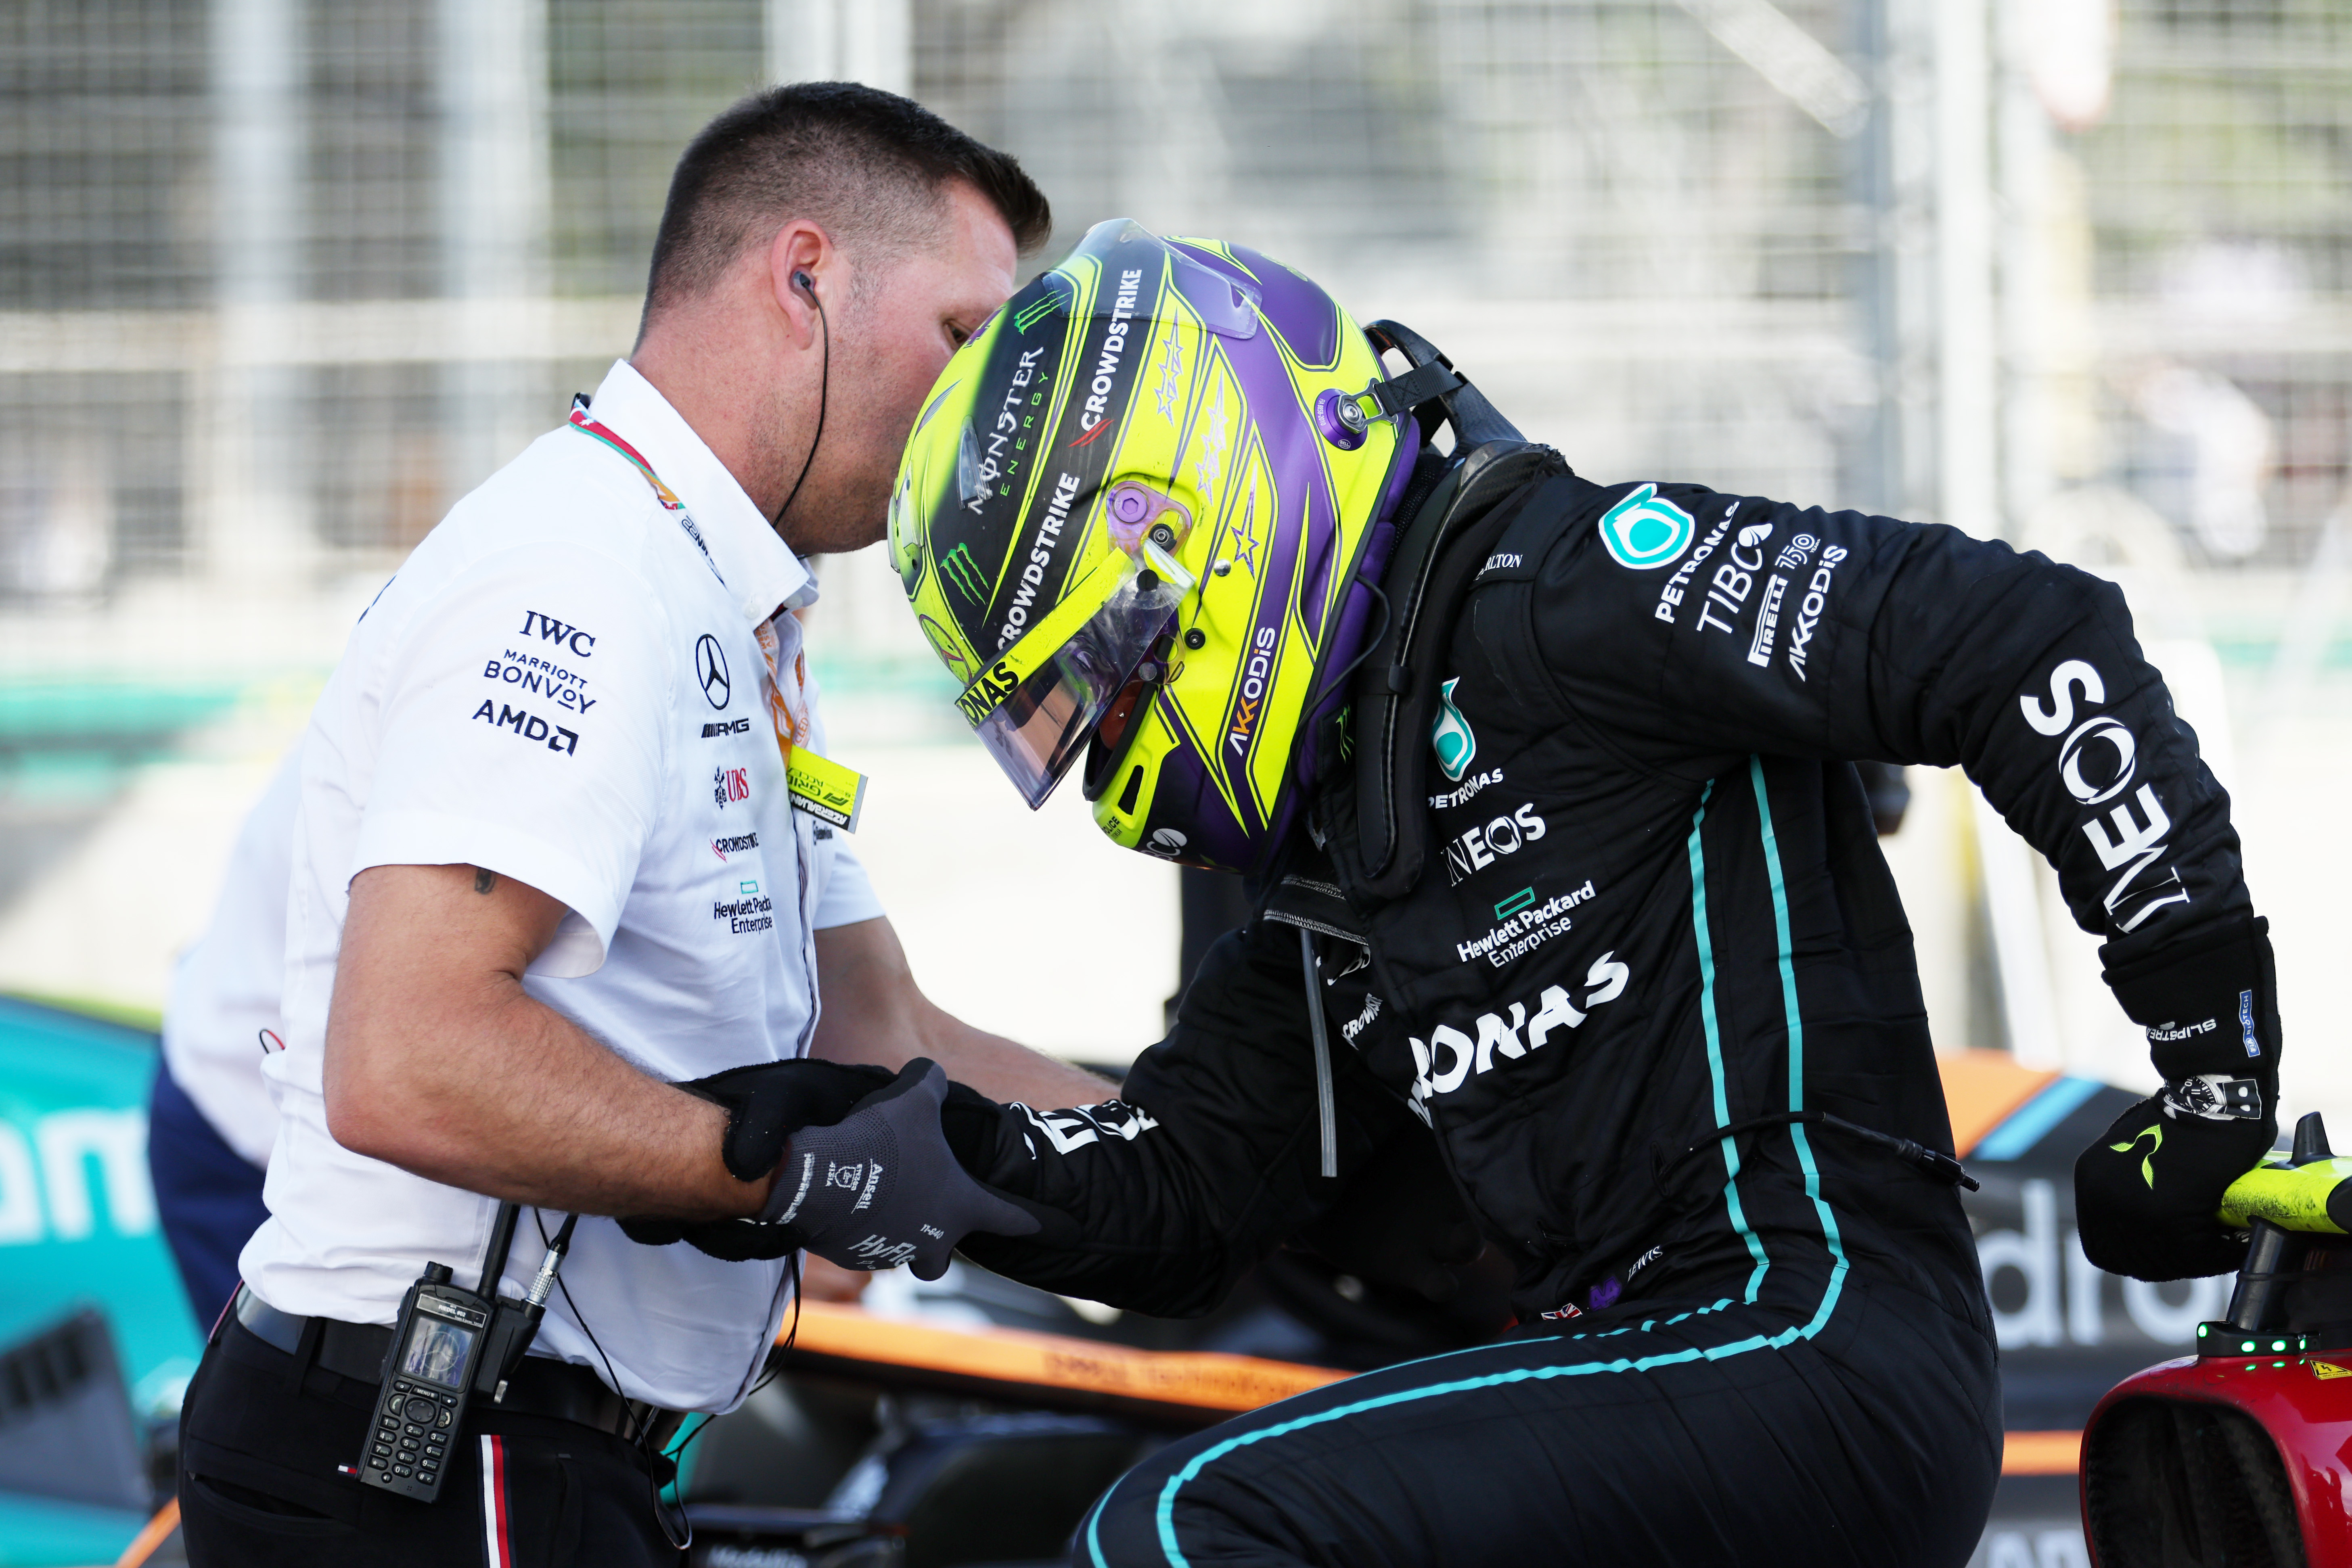 Fourth placed Lewis Hamilton is assisted from his car after the Azerbaijan Grand Prix. (Photo by Bryn Lennon - Formula 1/Formula 1 via Getty Images)